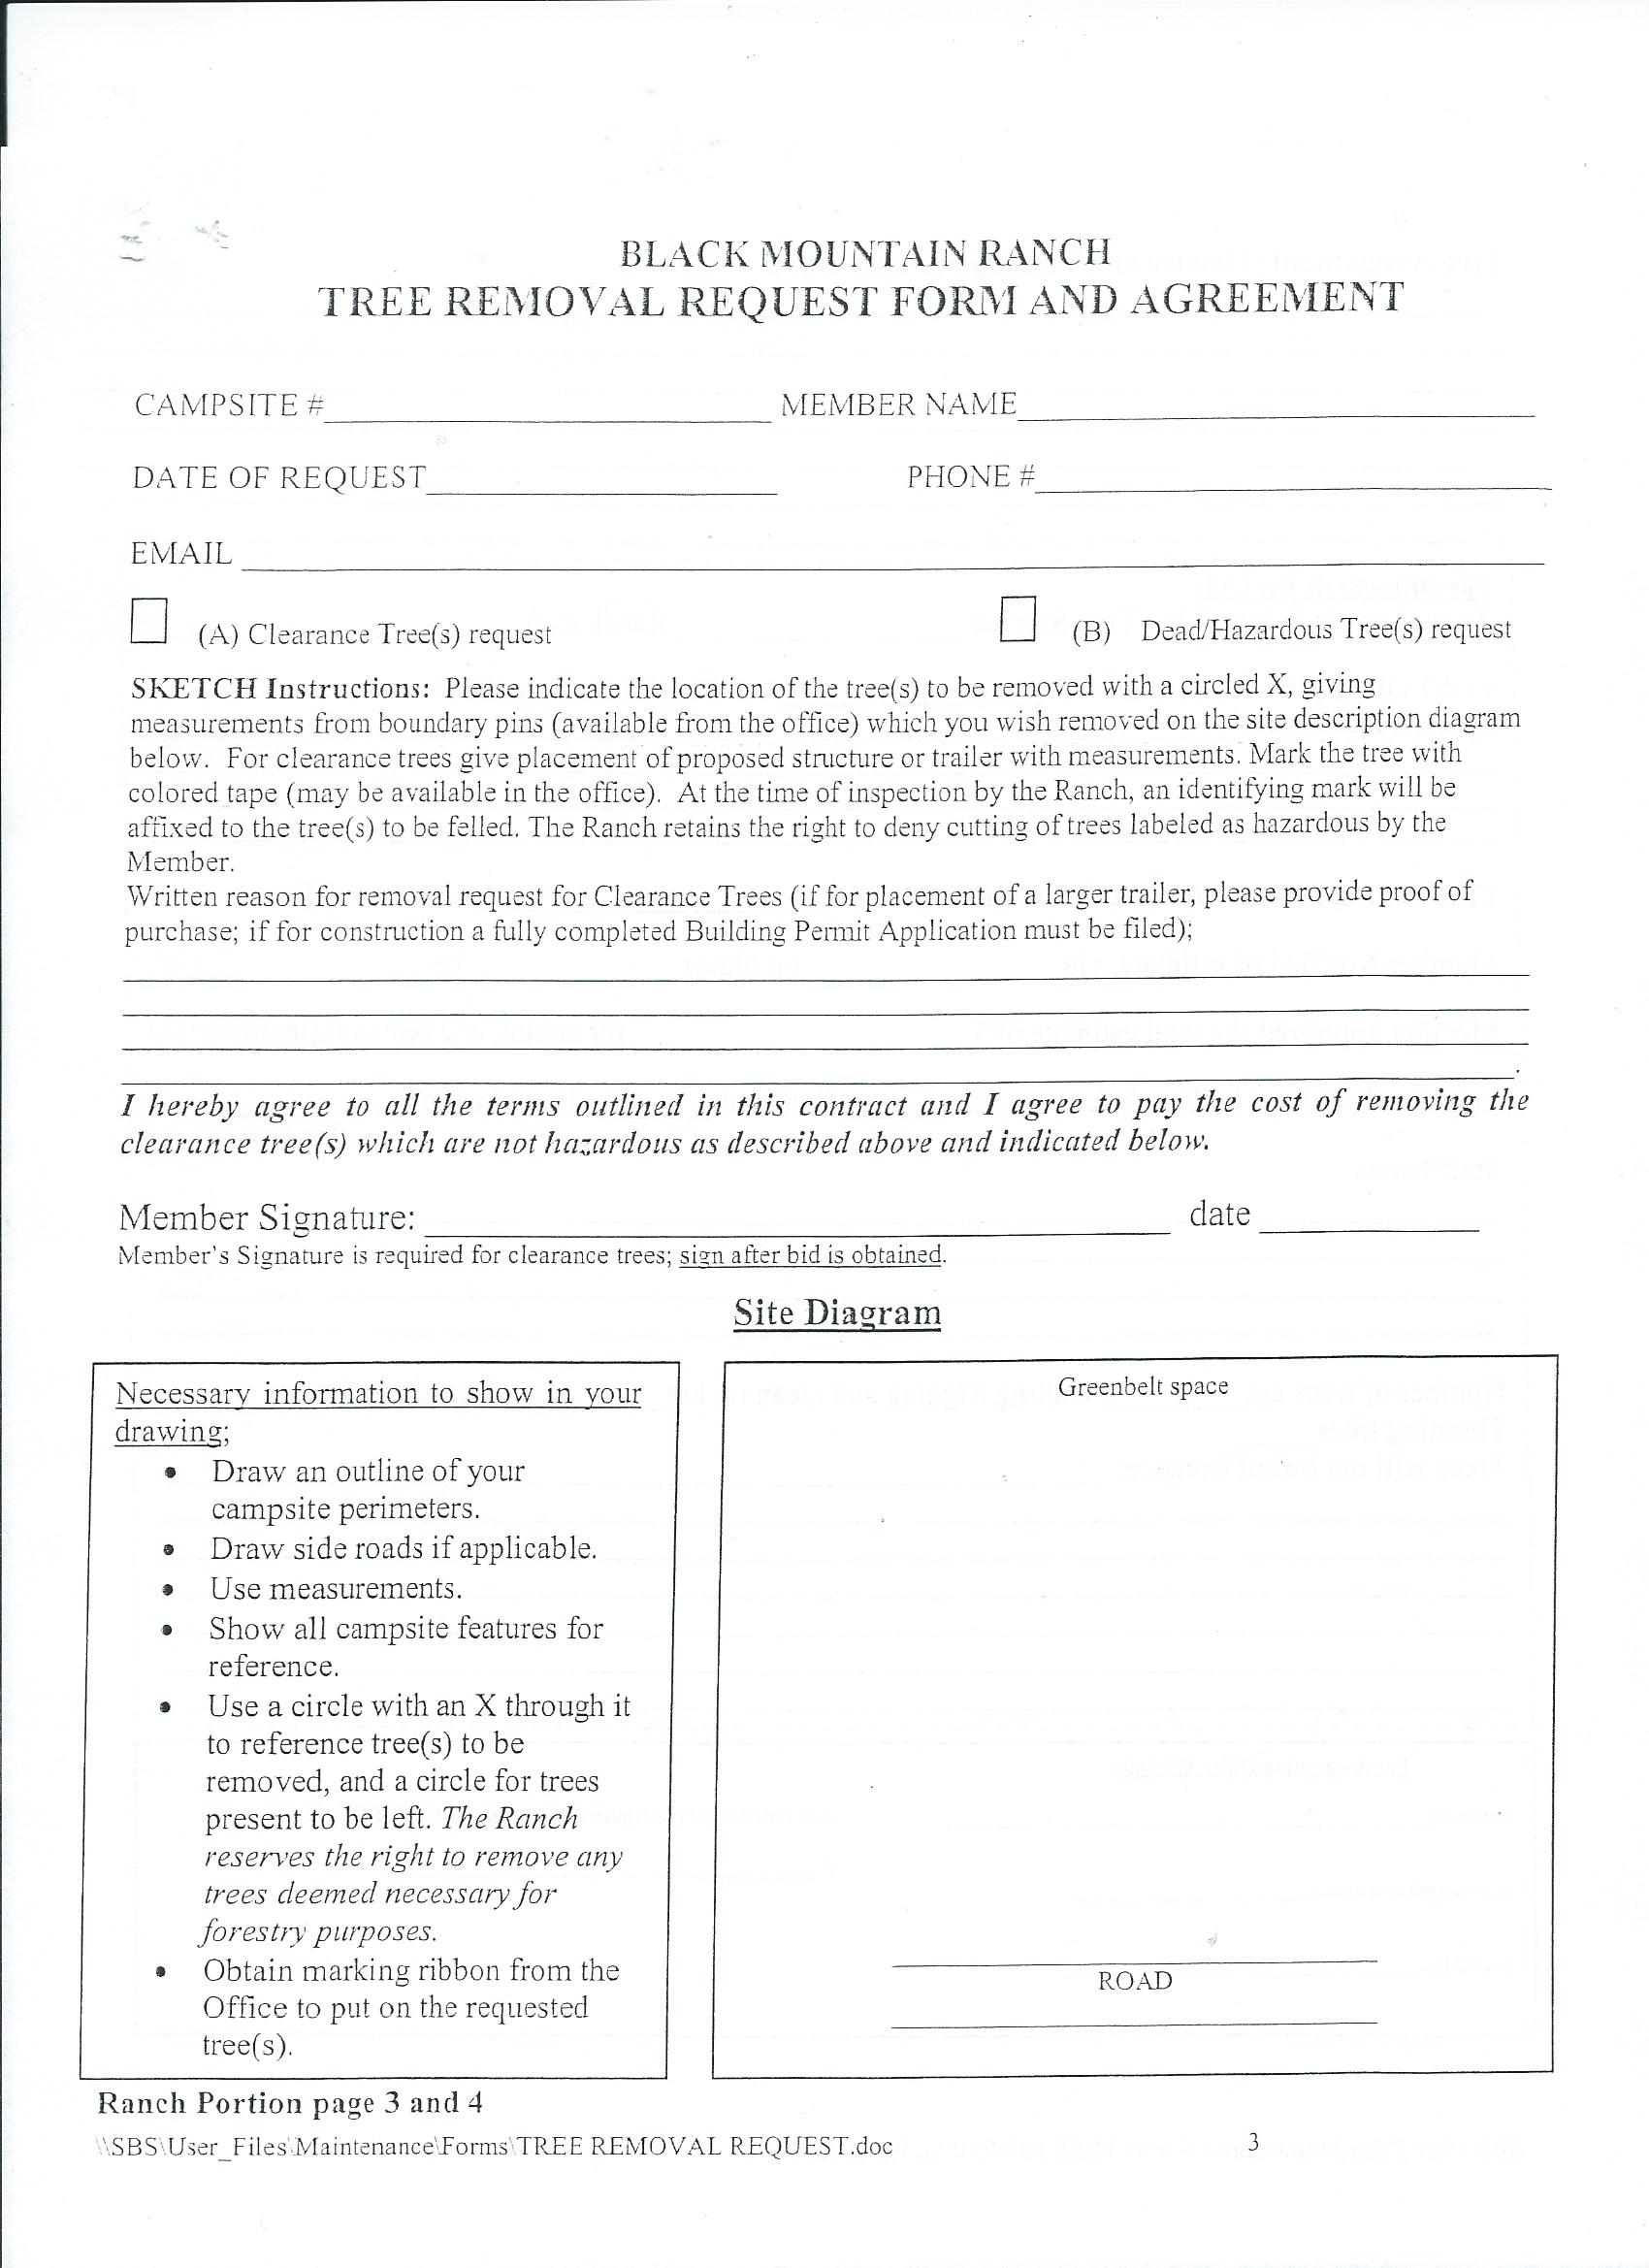 Tree Removal Request Form and Agreement 1 Black Mountain Ranch Campground